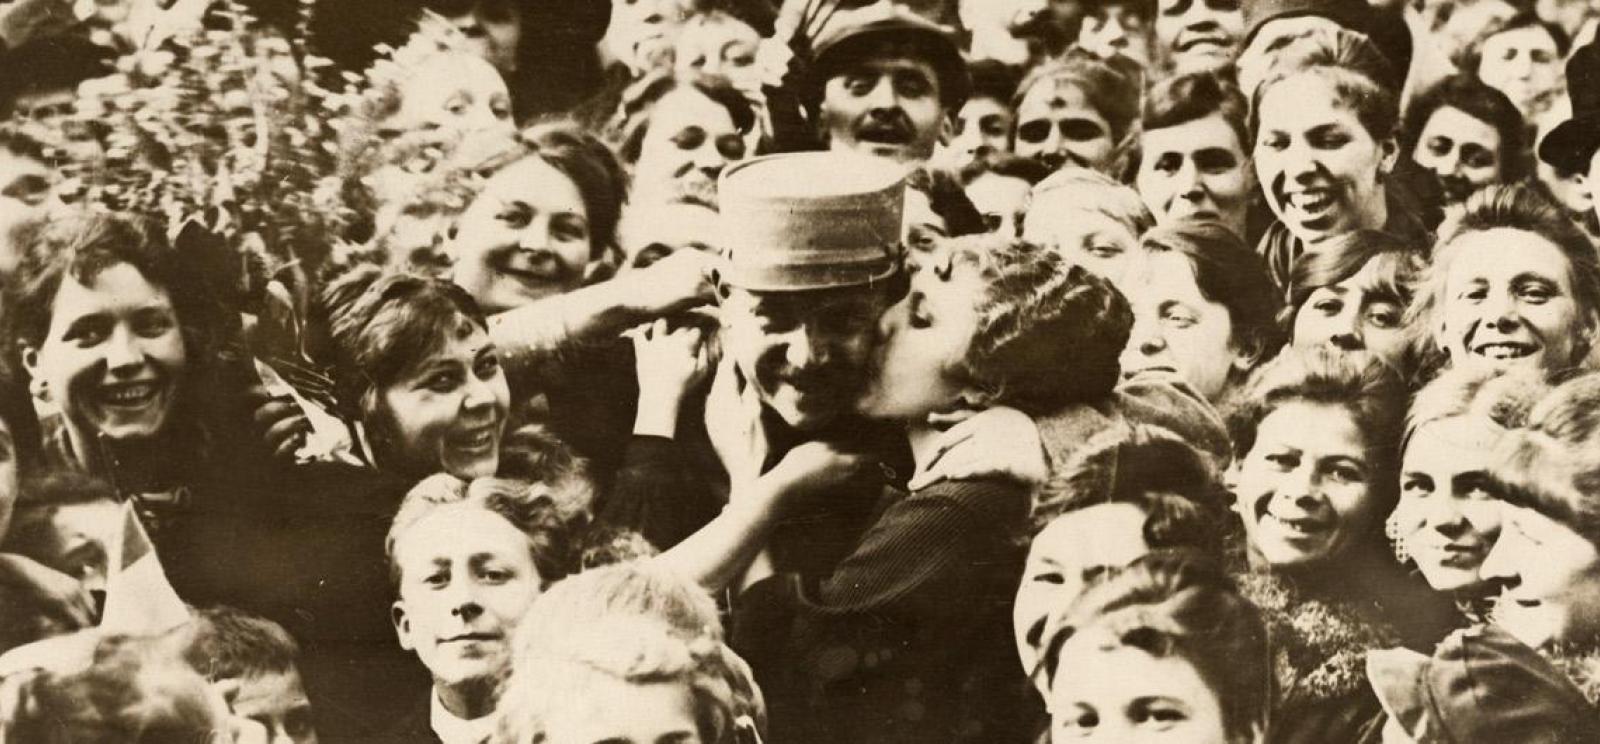 Sepia photograph of a crowd of smiling faces. In the center a woman is kissing the cheek of a man wearing military uniform.